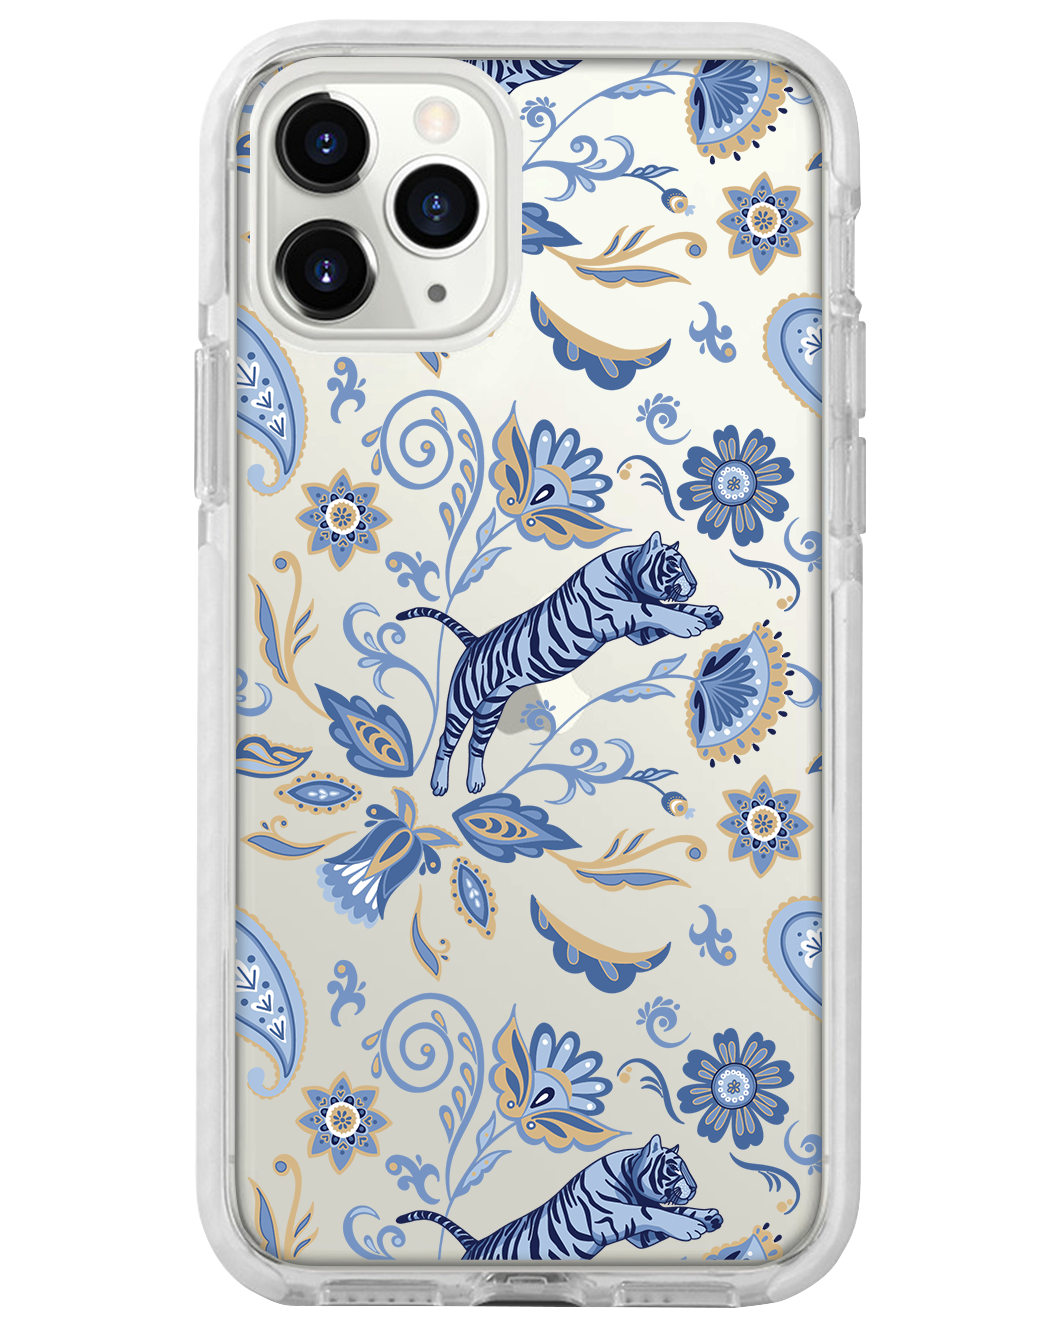 iPhone - Tiger & Floral